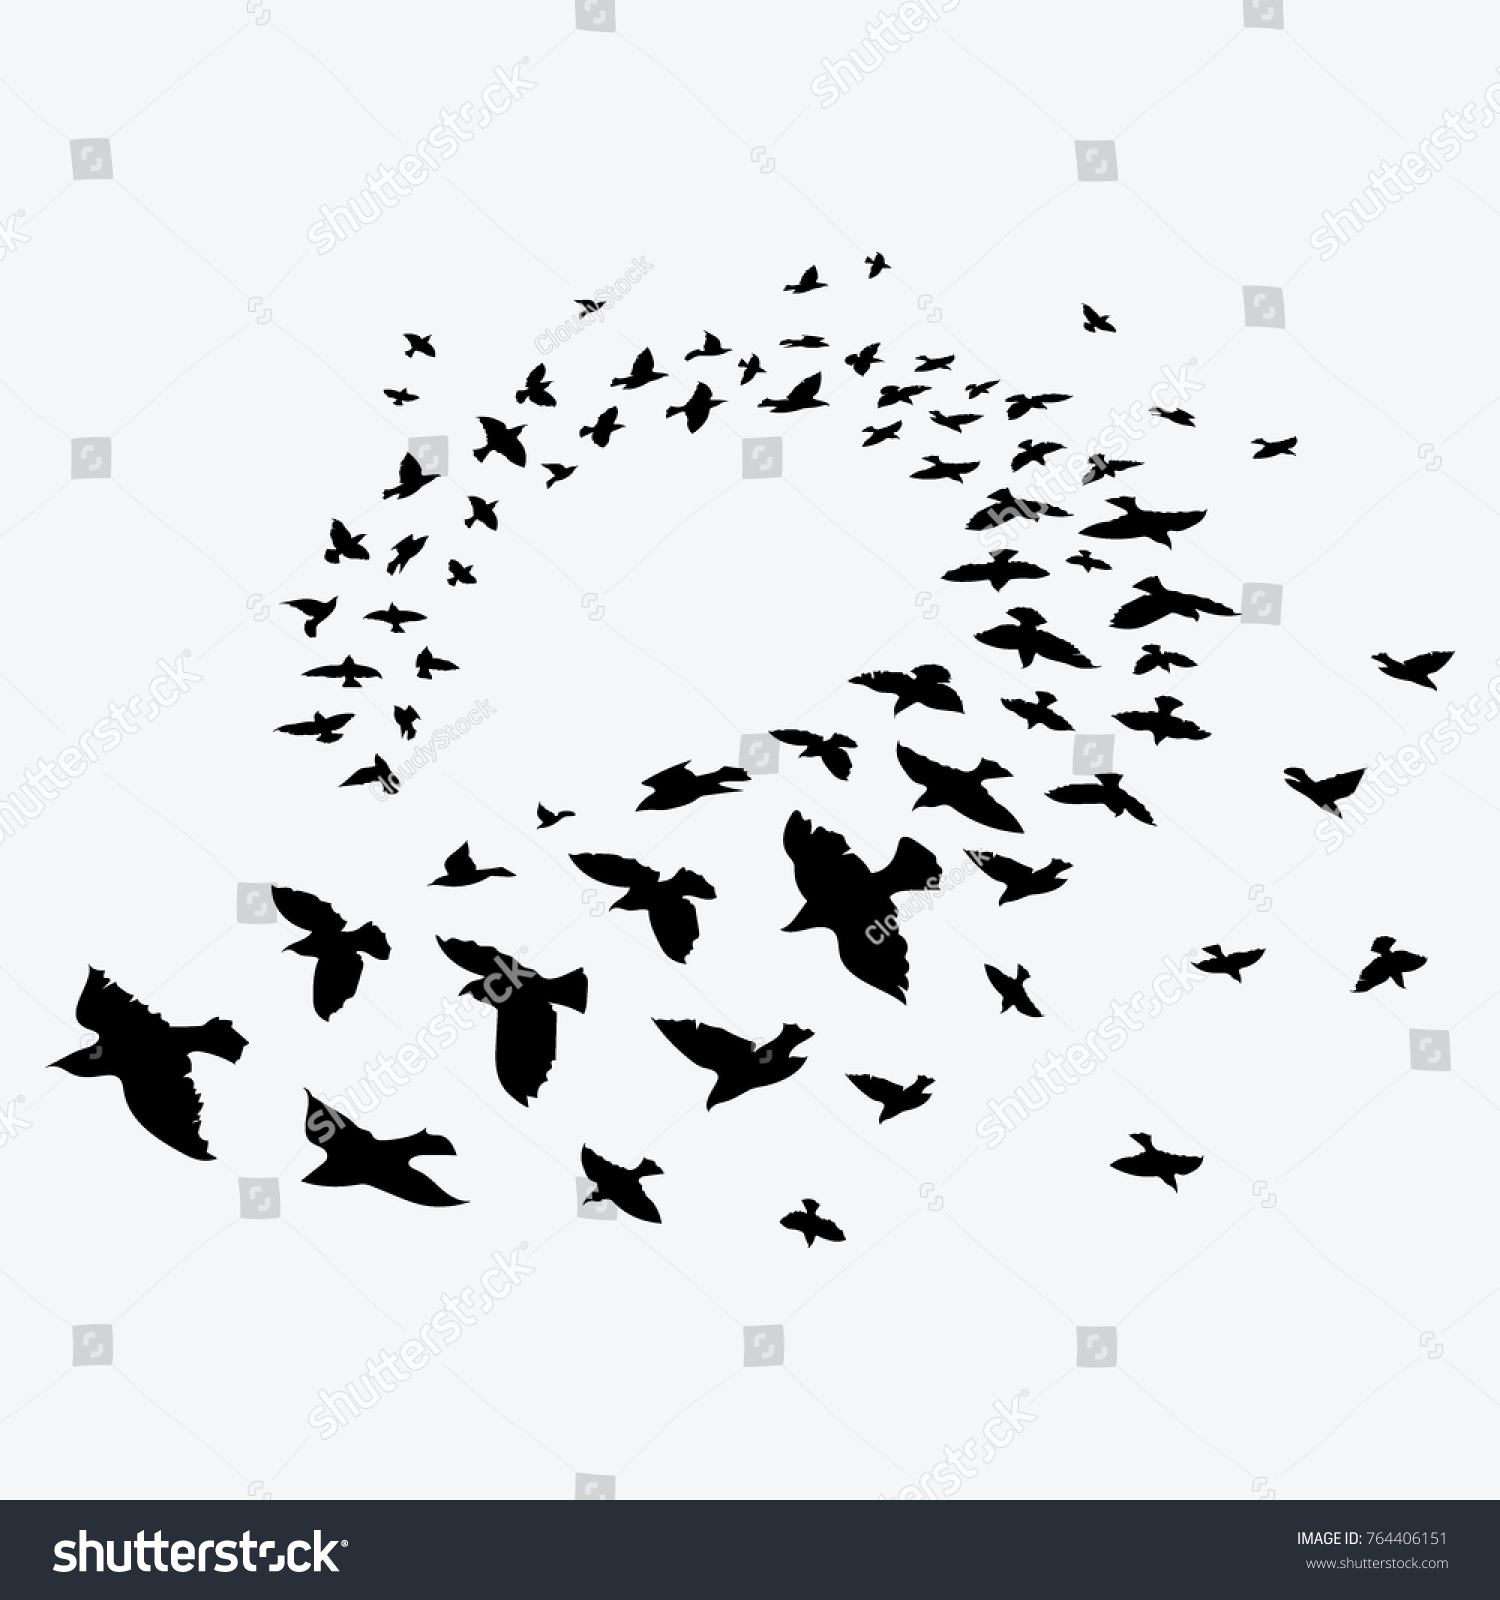 Silhouette Flock Birds Black Contours Flying Stock Vector Royalty Free 764406151,How To Cut A Dragon Fruit Video